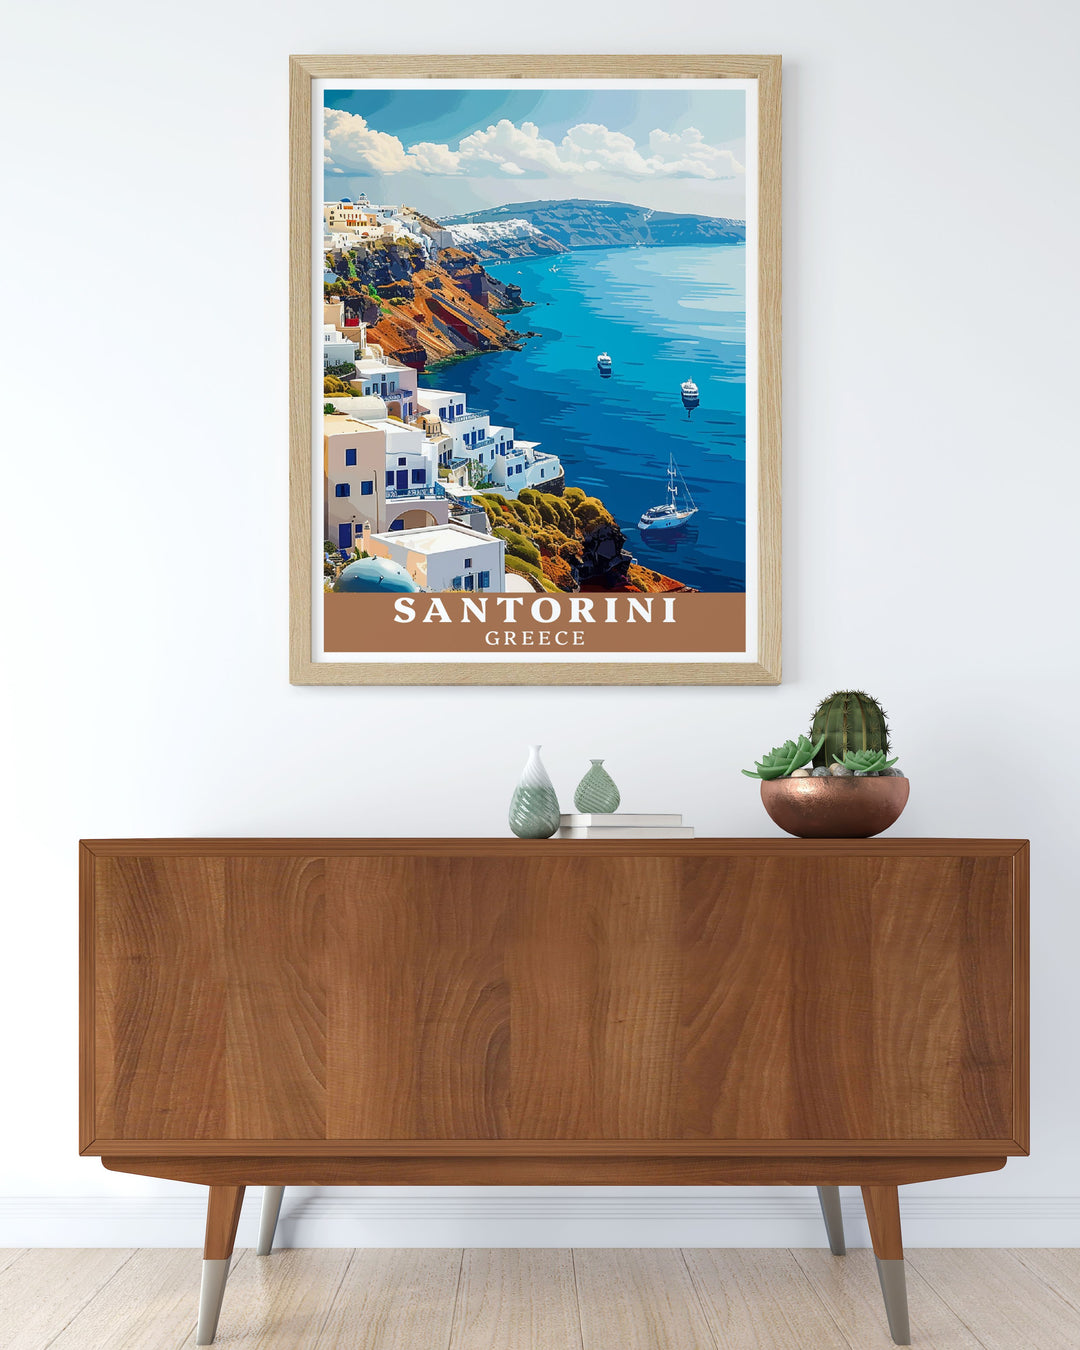 This Greece Art Print captures the scenic beauty and vibrant culture of Fira, Santorini. Perfect for bringing the iconic landscapes of Greece into your home decor.